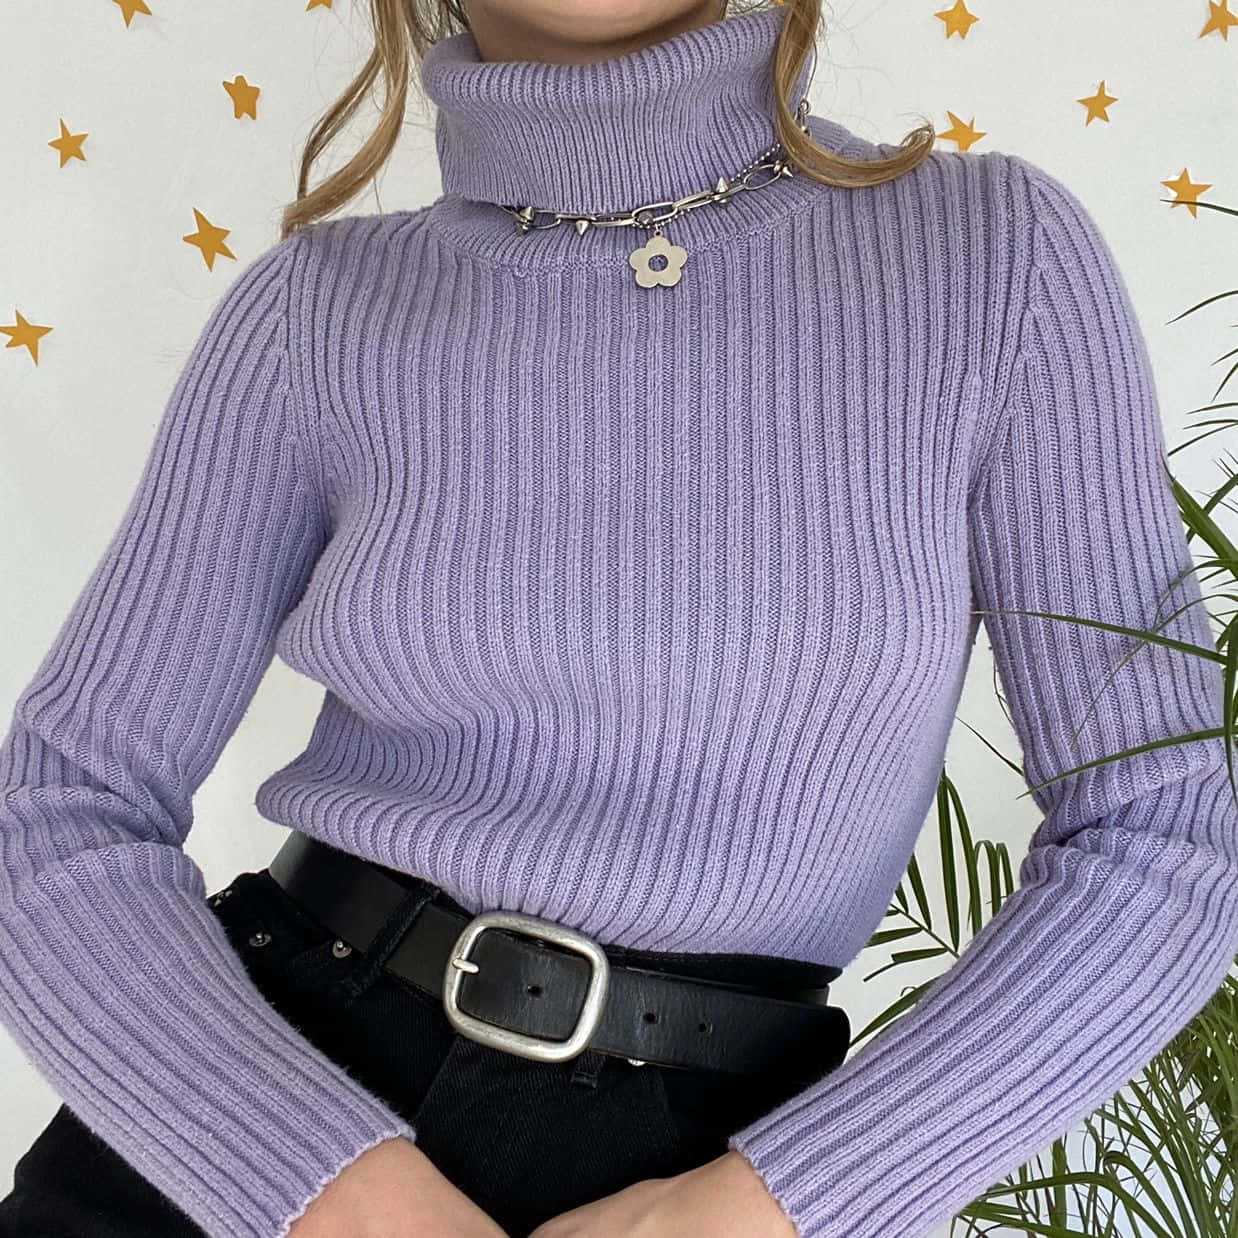 Live in Colour with This Stylish Purple Turtle-neck Sweater Wallpaper